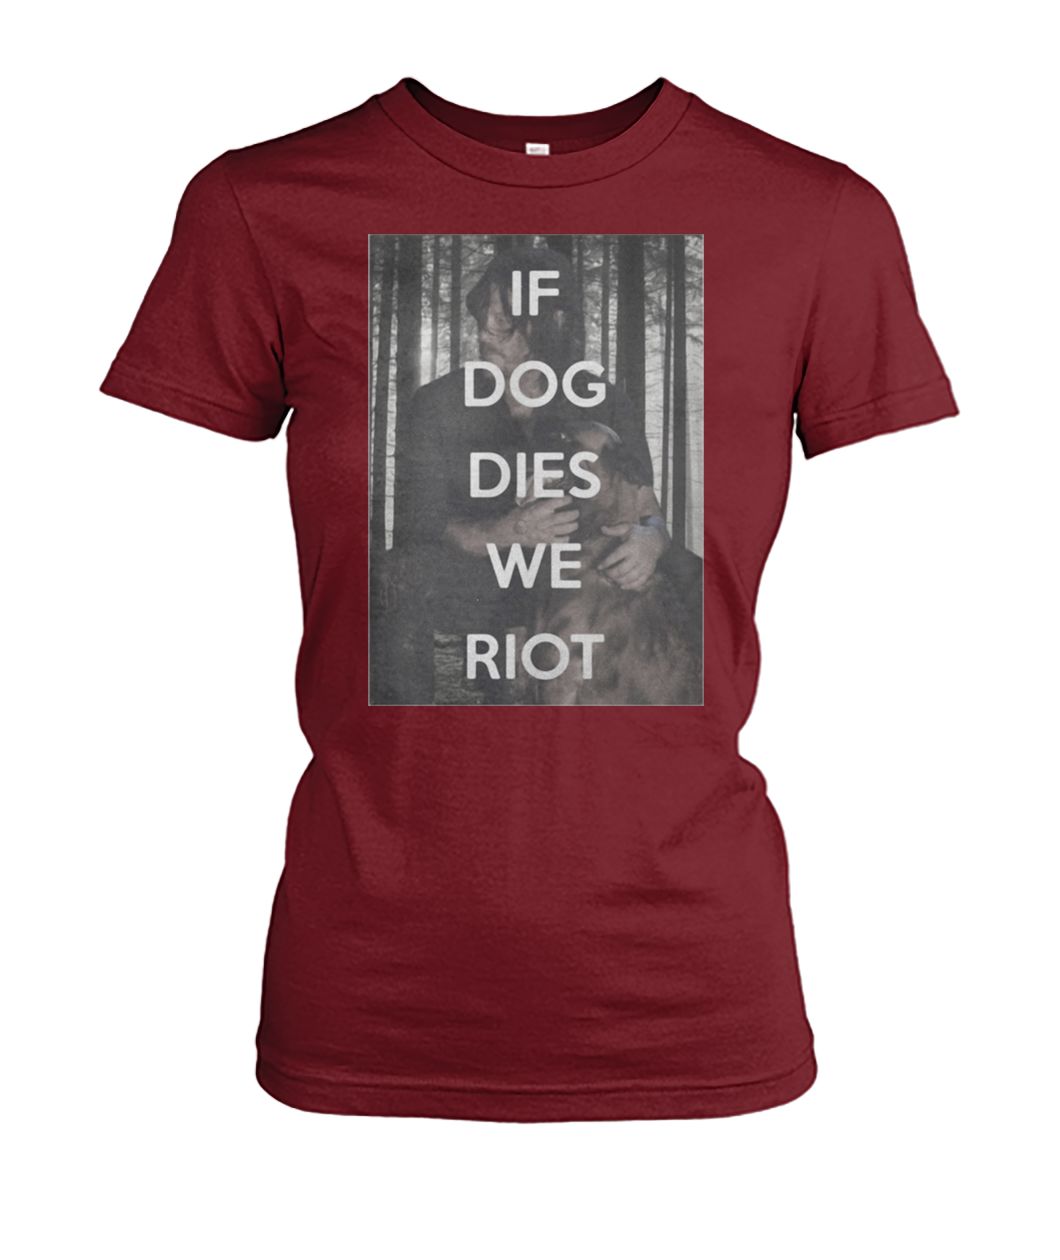 The walking dead daryl and dog if dog dies we riot women's crew tee